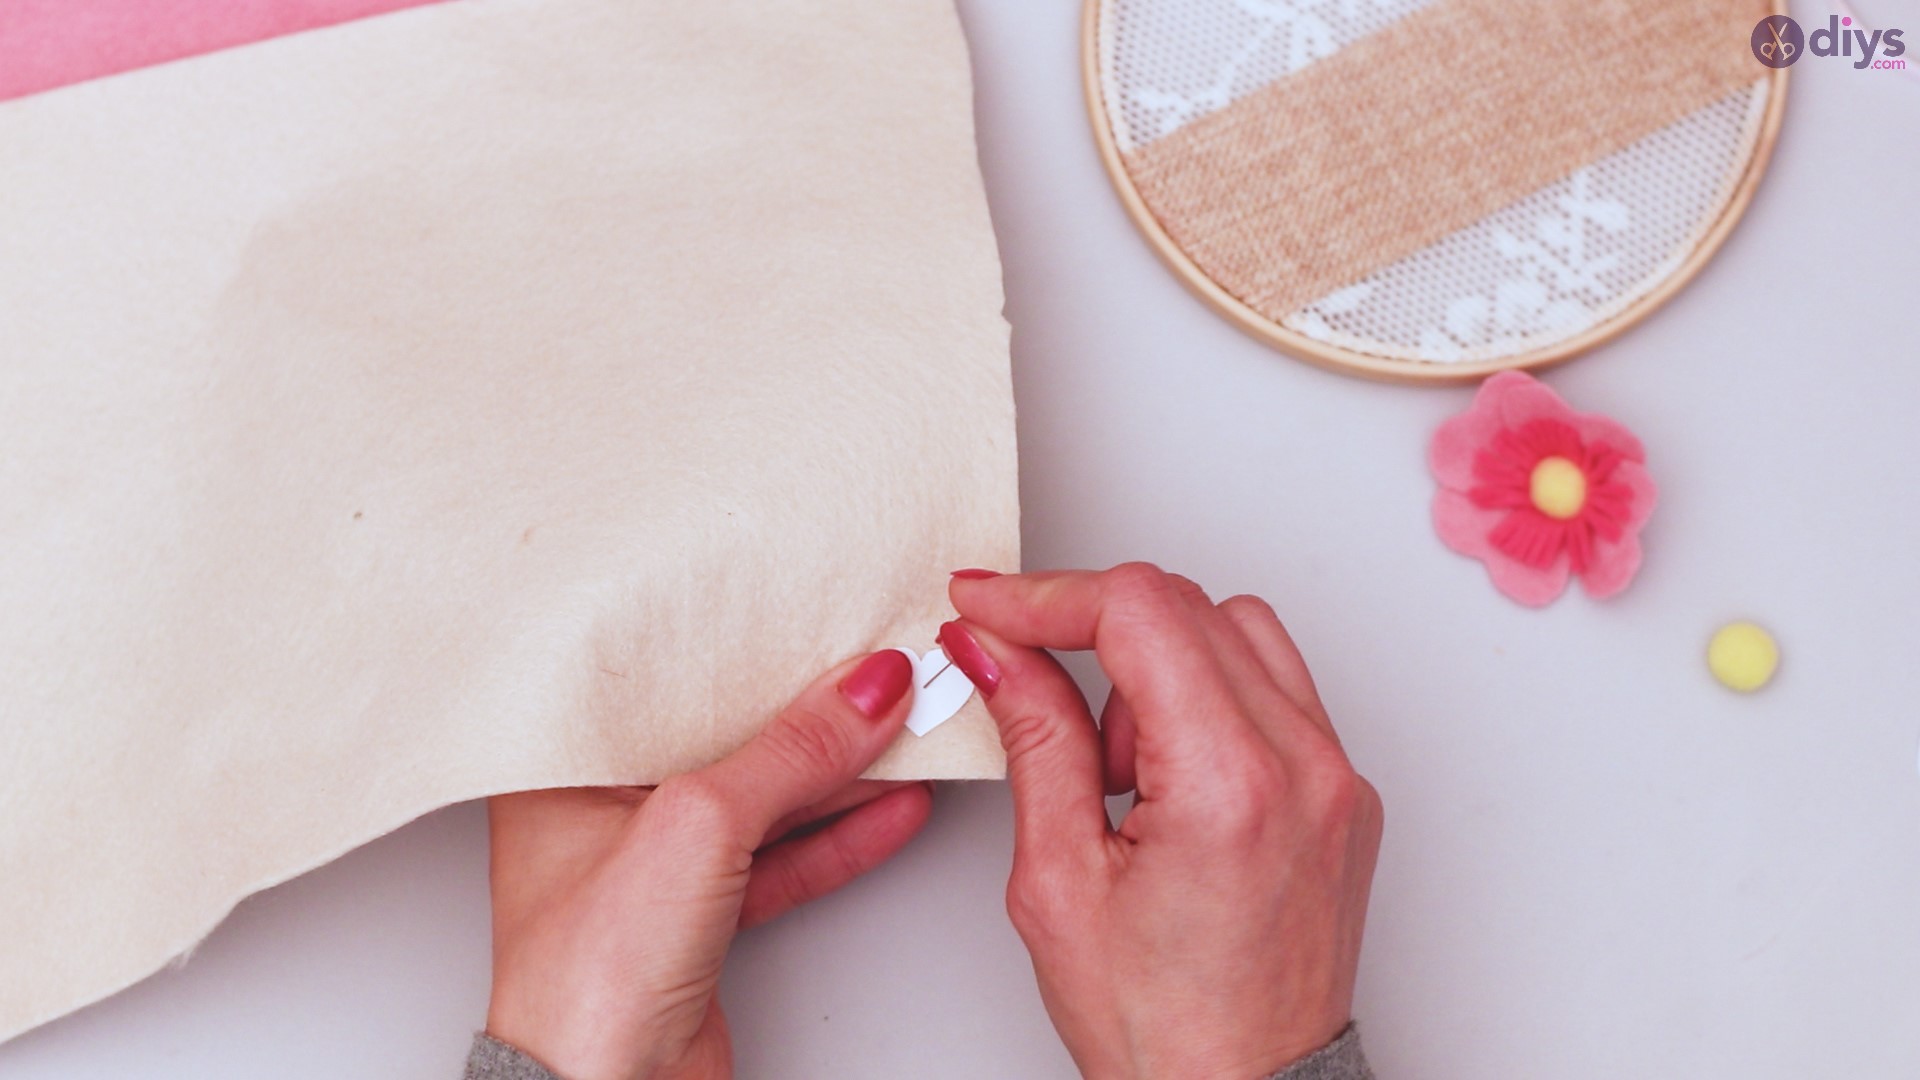 Diy embroidery hoop wall decor tutorial step by step (33)